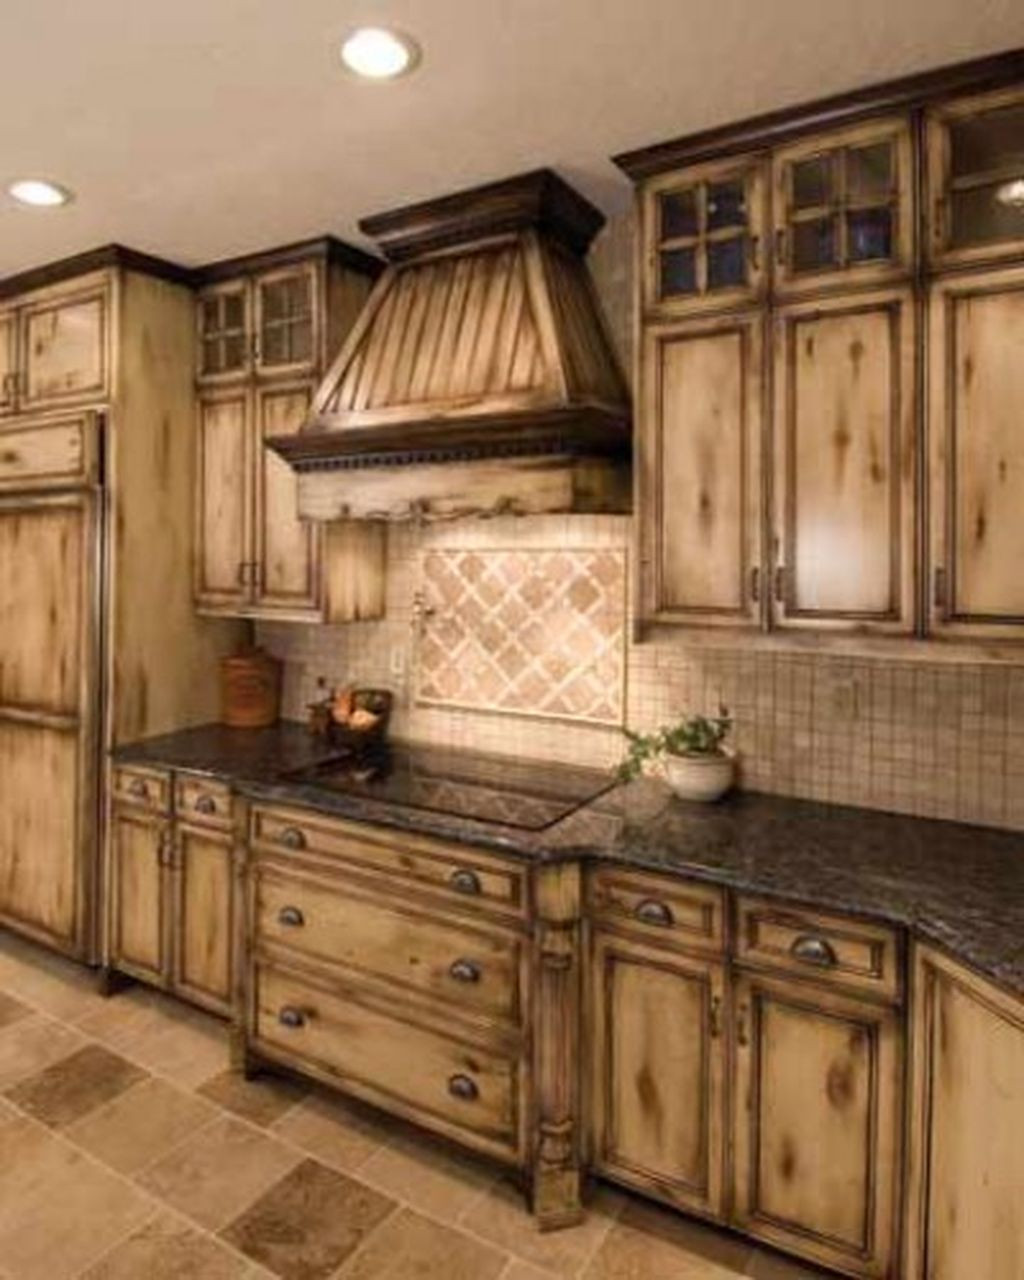 Rustic Painted Kitchen Cabinets
 90 Beautiful Farmhouse Style Rustic Kitchen Cabinet